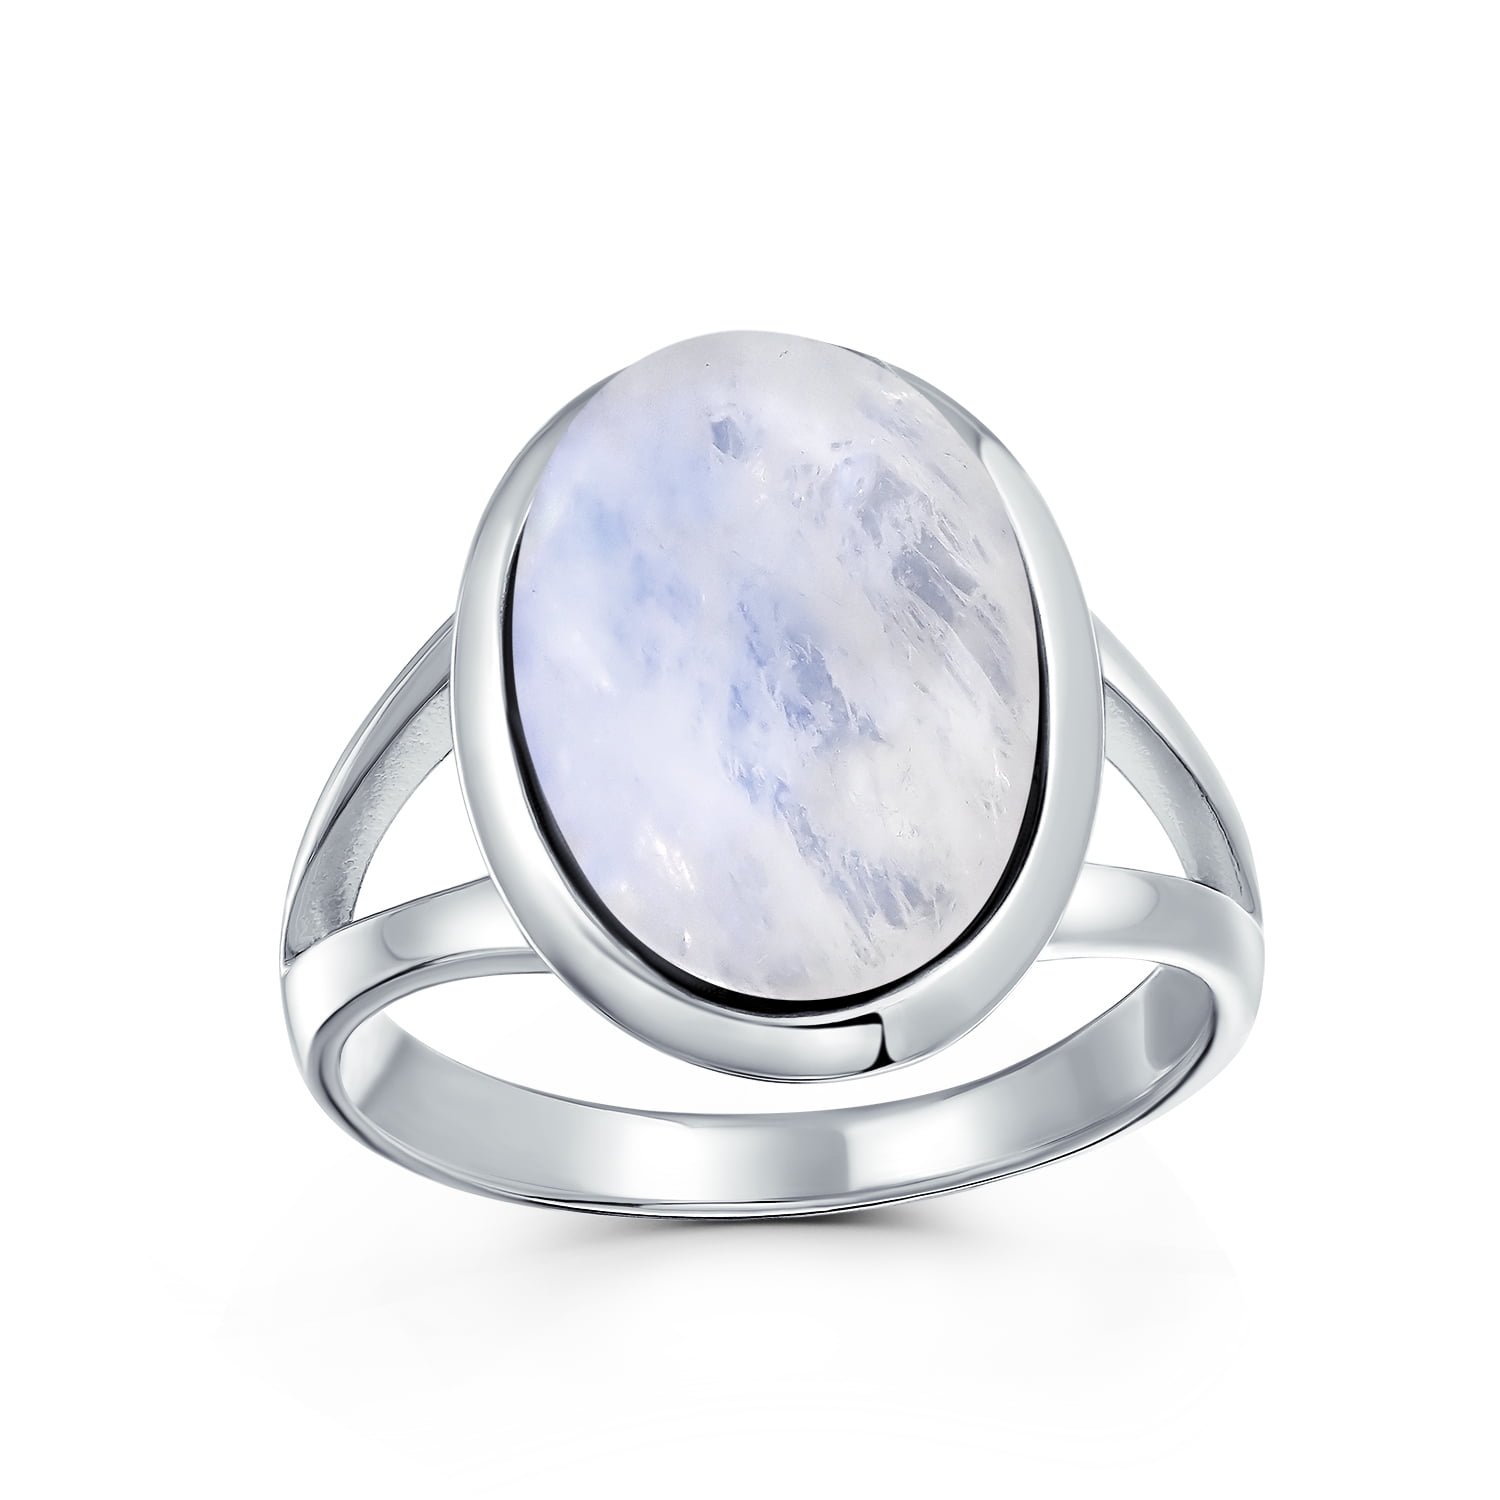 Oval cabochon gemstone cocktail statement ring large Agate adjustable silver ring